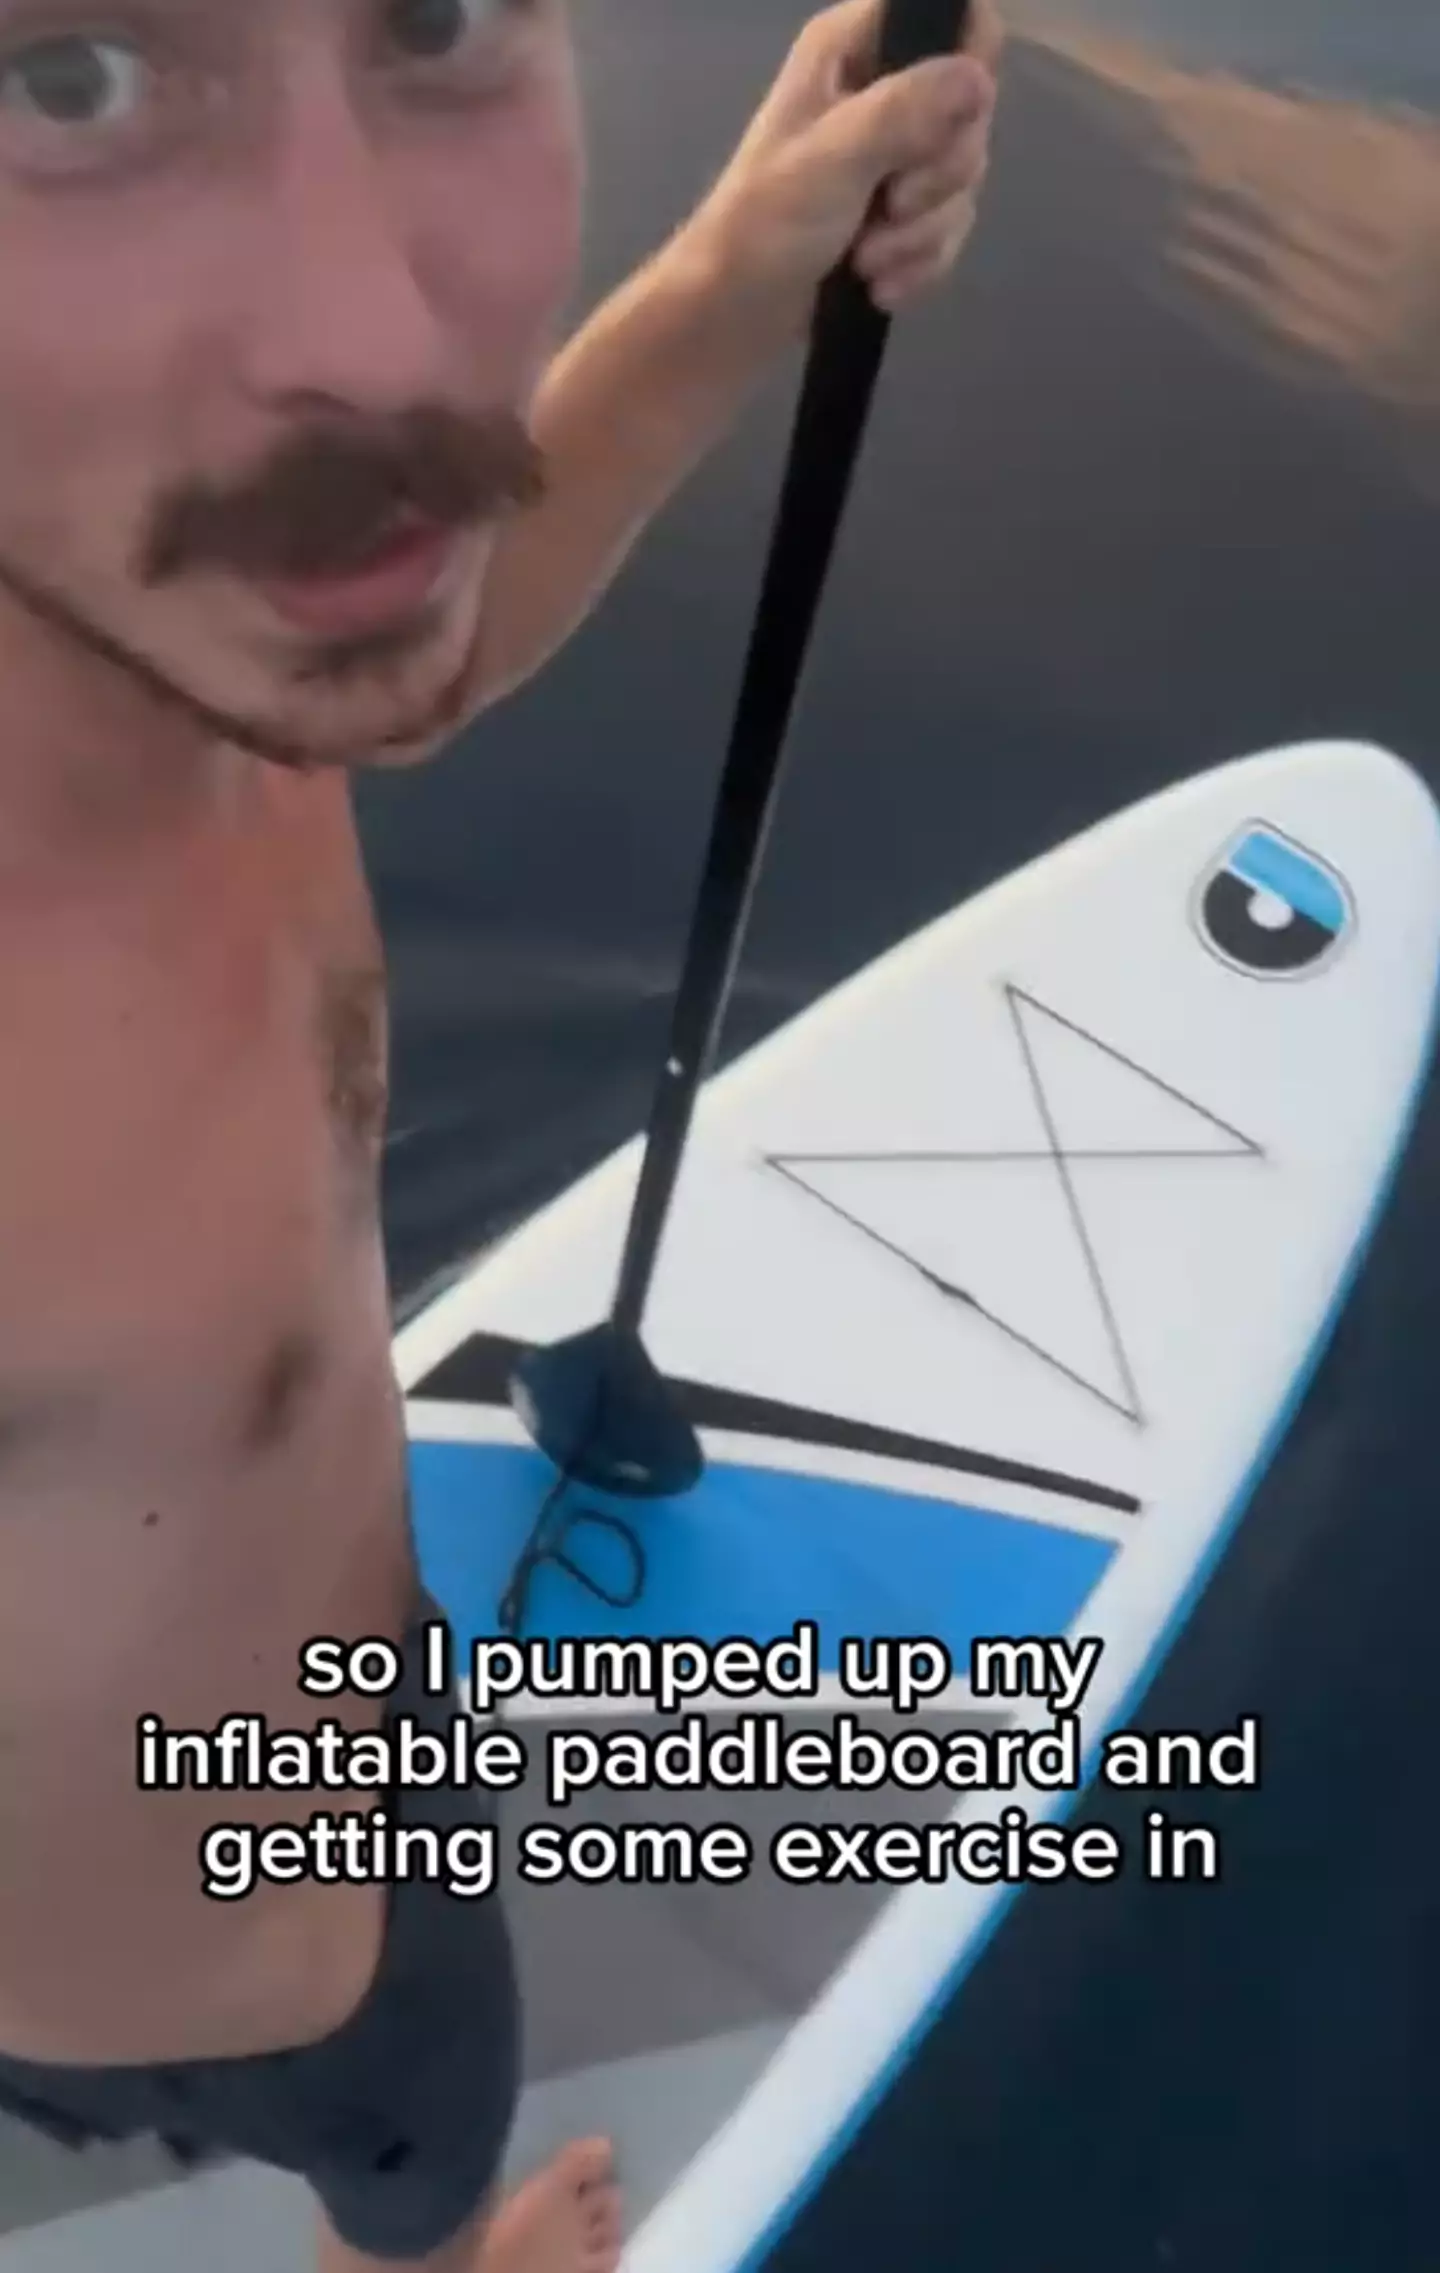 Luke shared with his viewers that he paddle-boards for exercise (TikTok/@sailing_songbird)